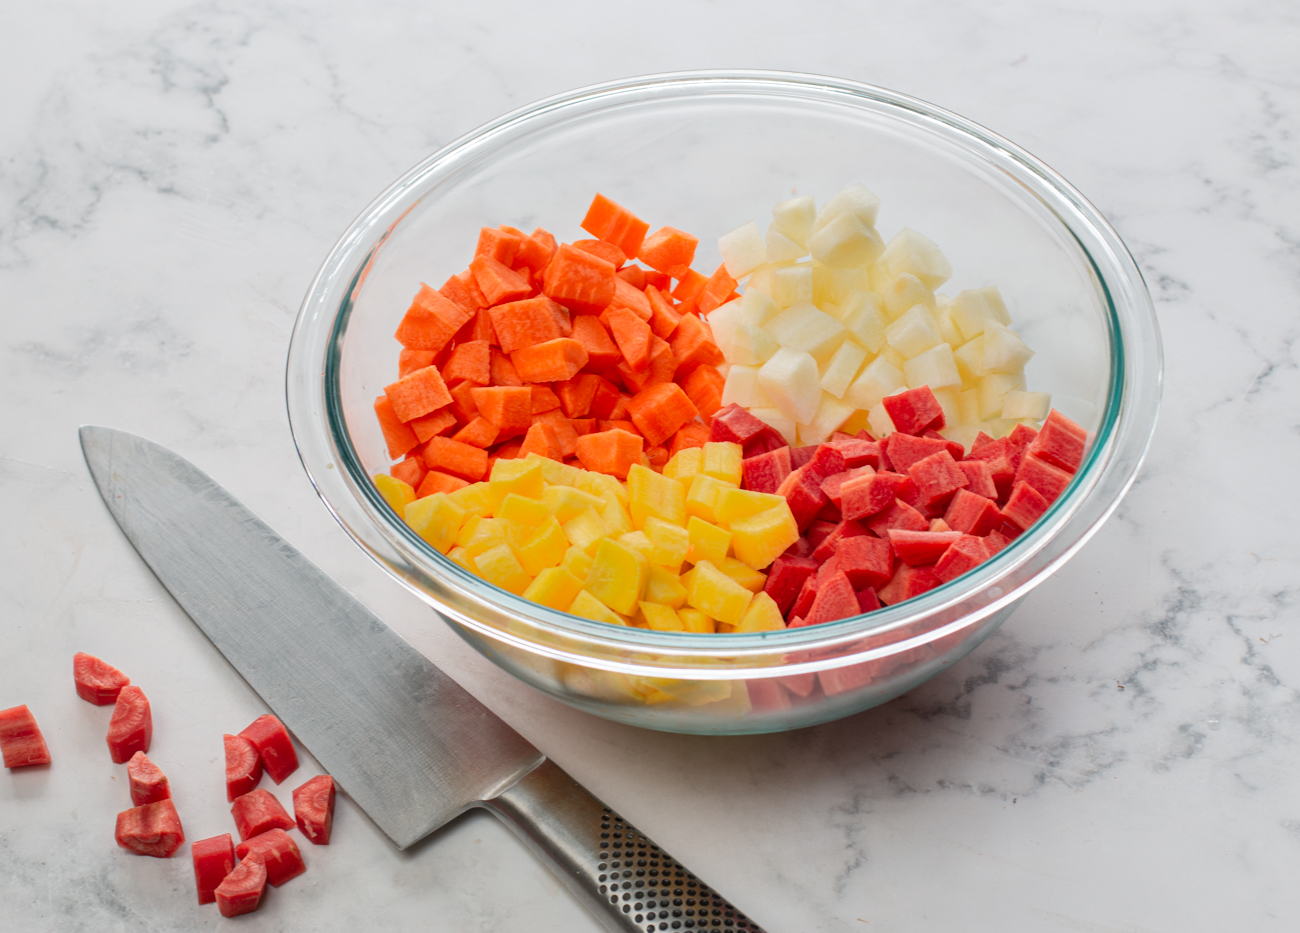 Peel and cut carrots into 1/2" cubes 